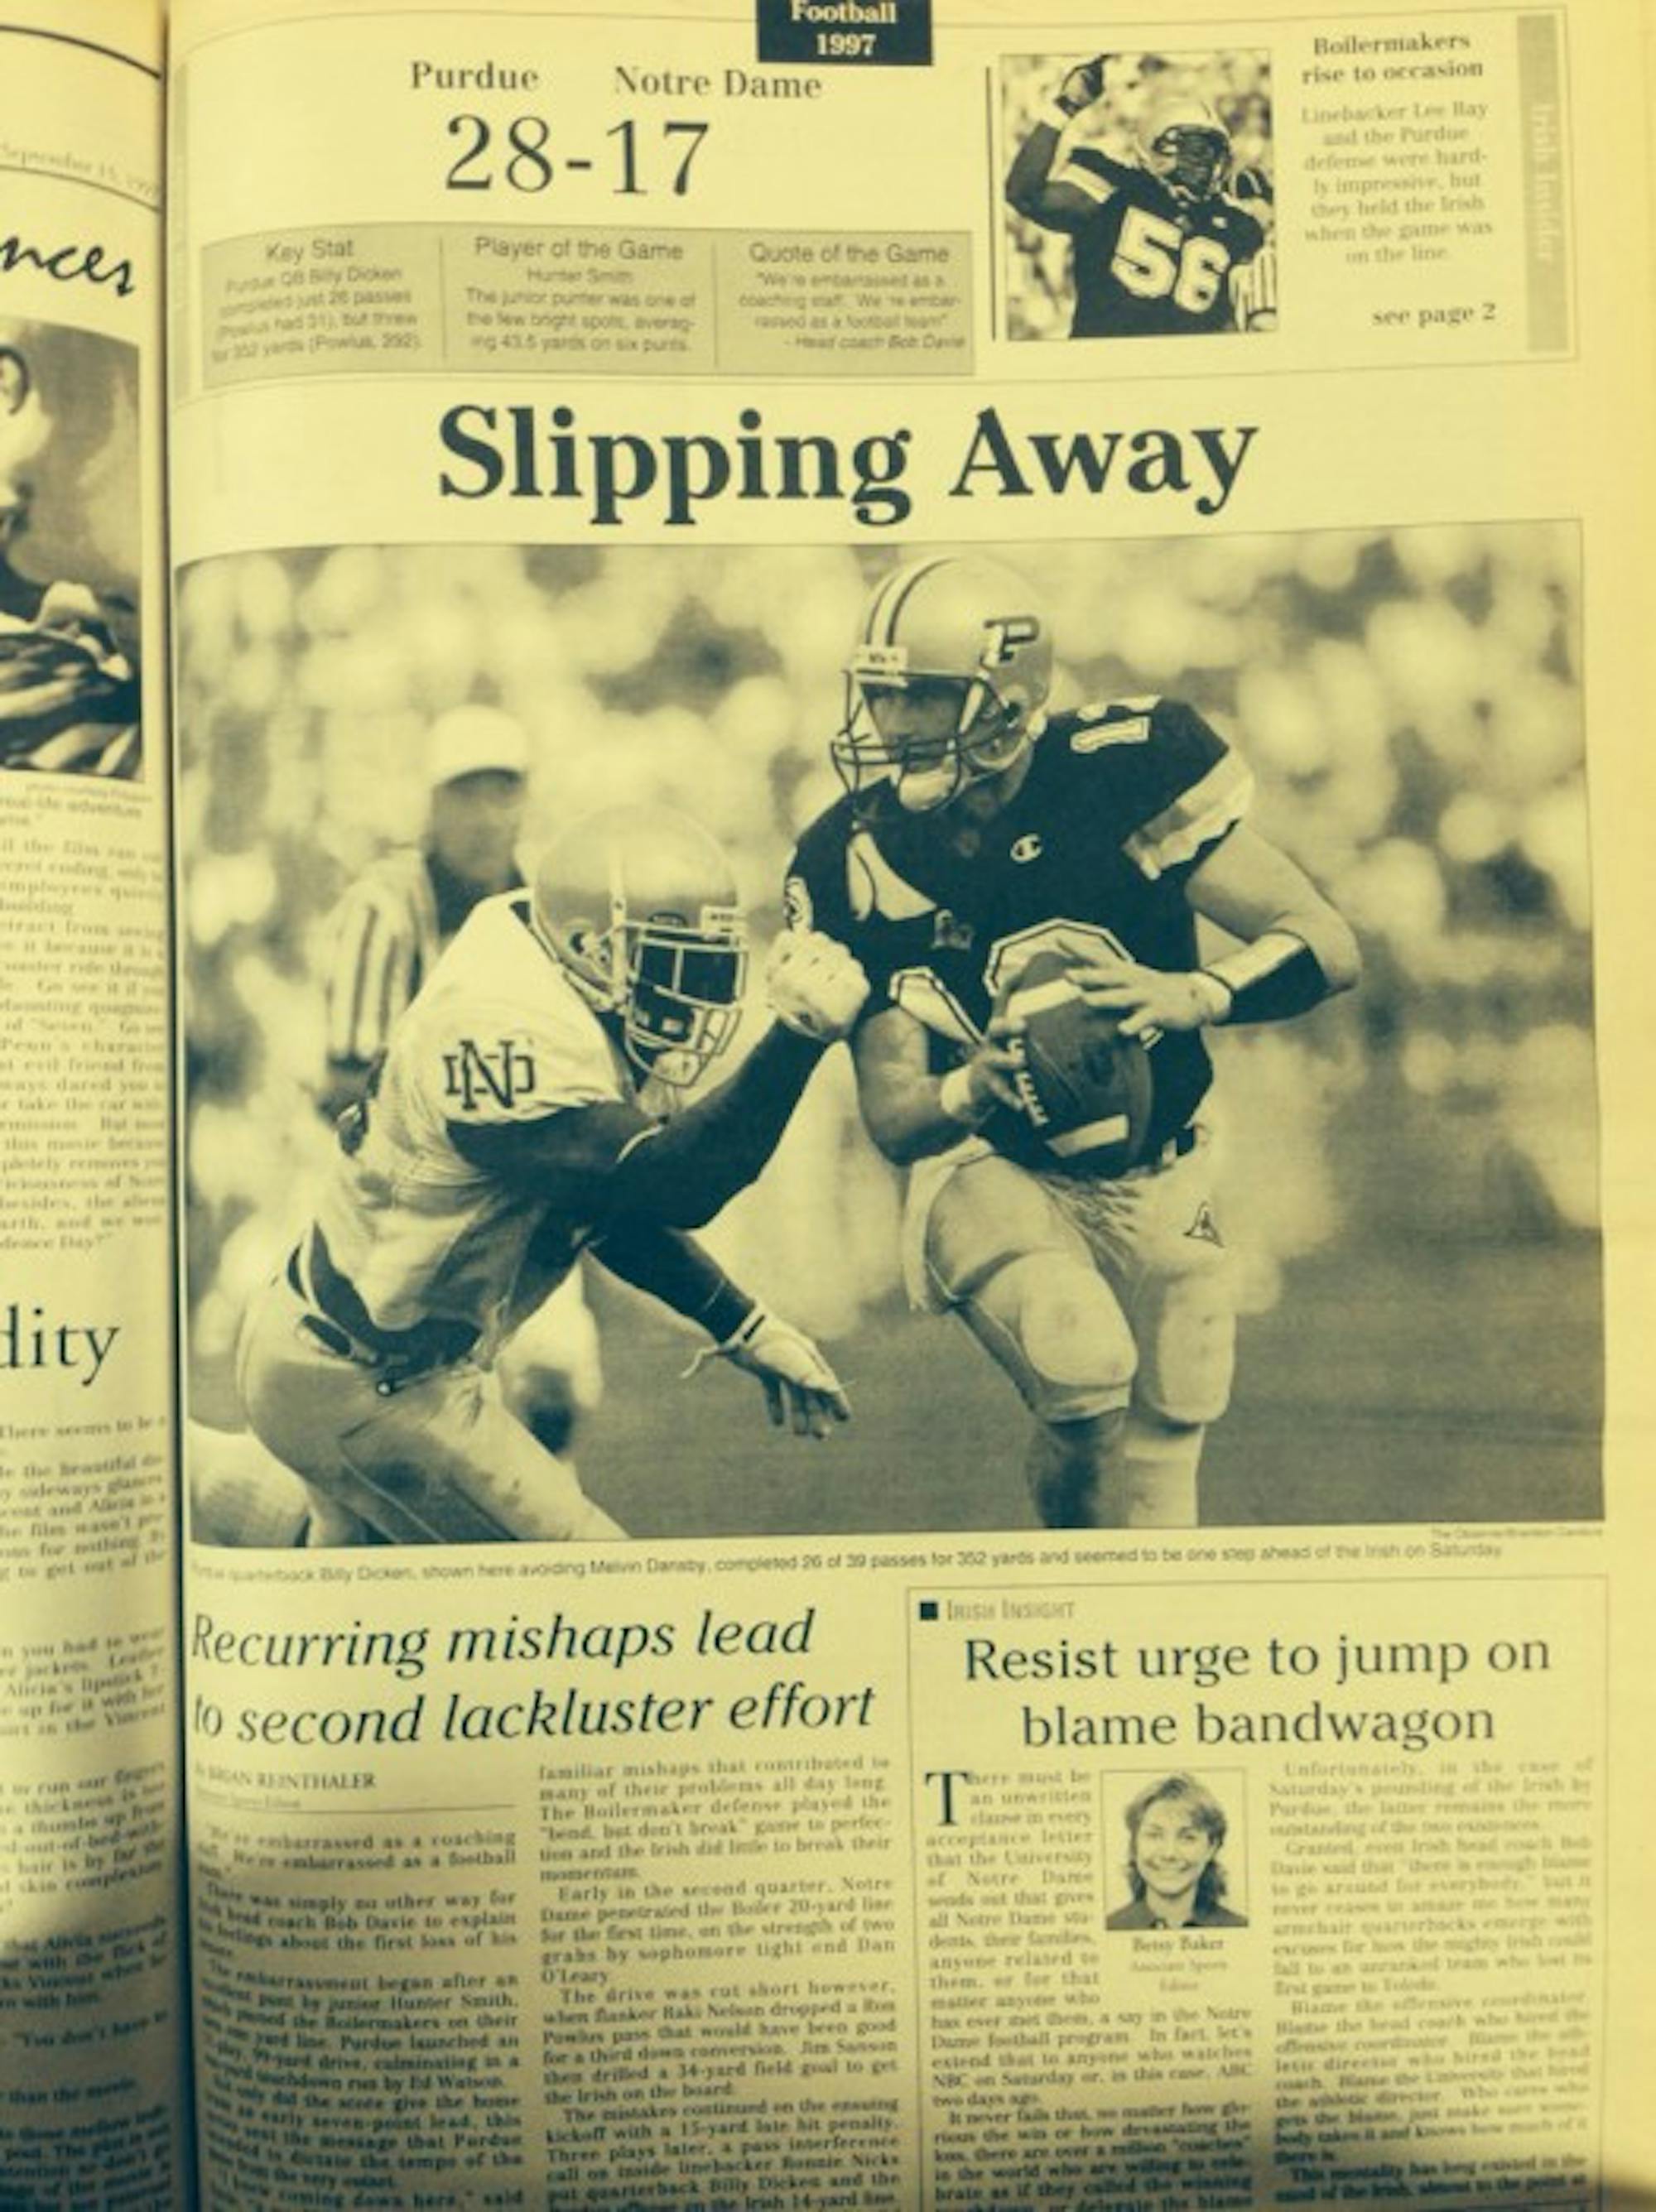 The Observer from Sept. 13, 1997.